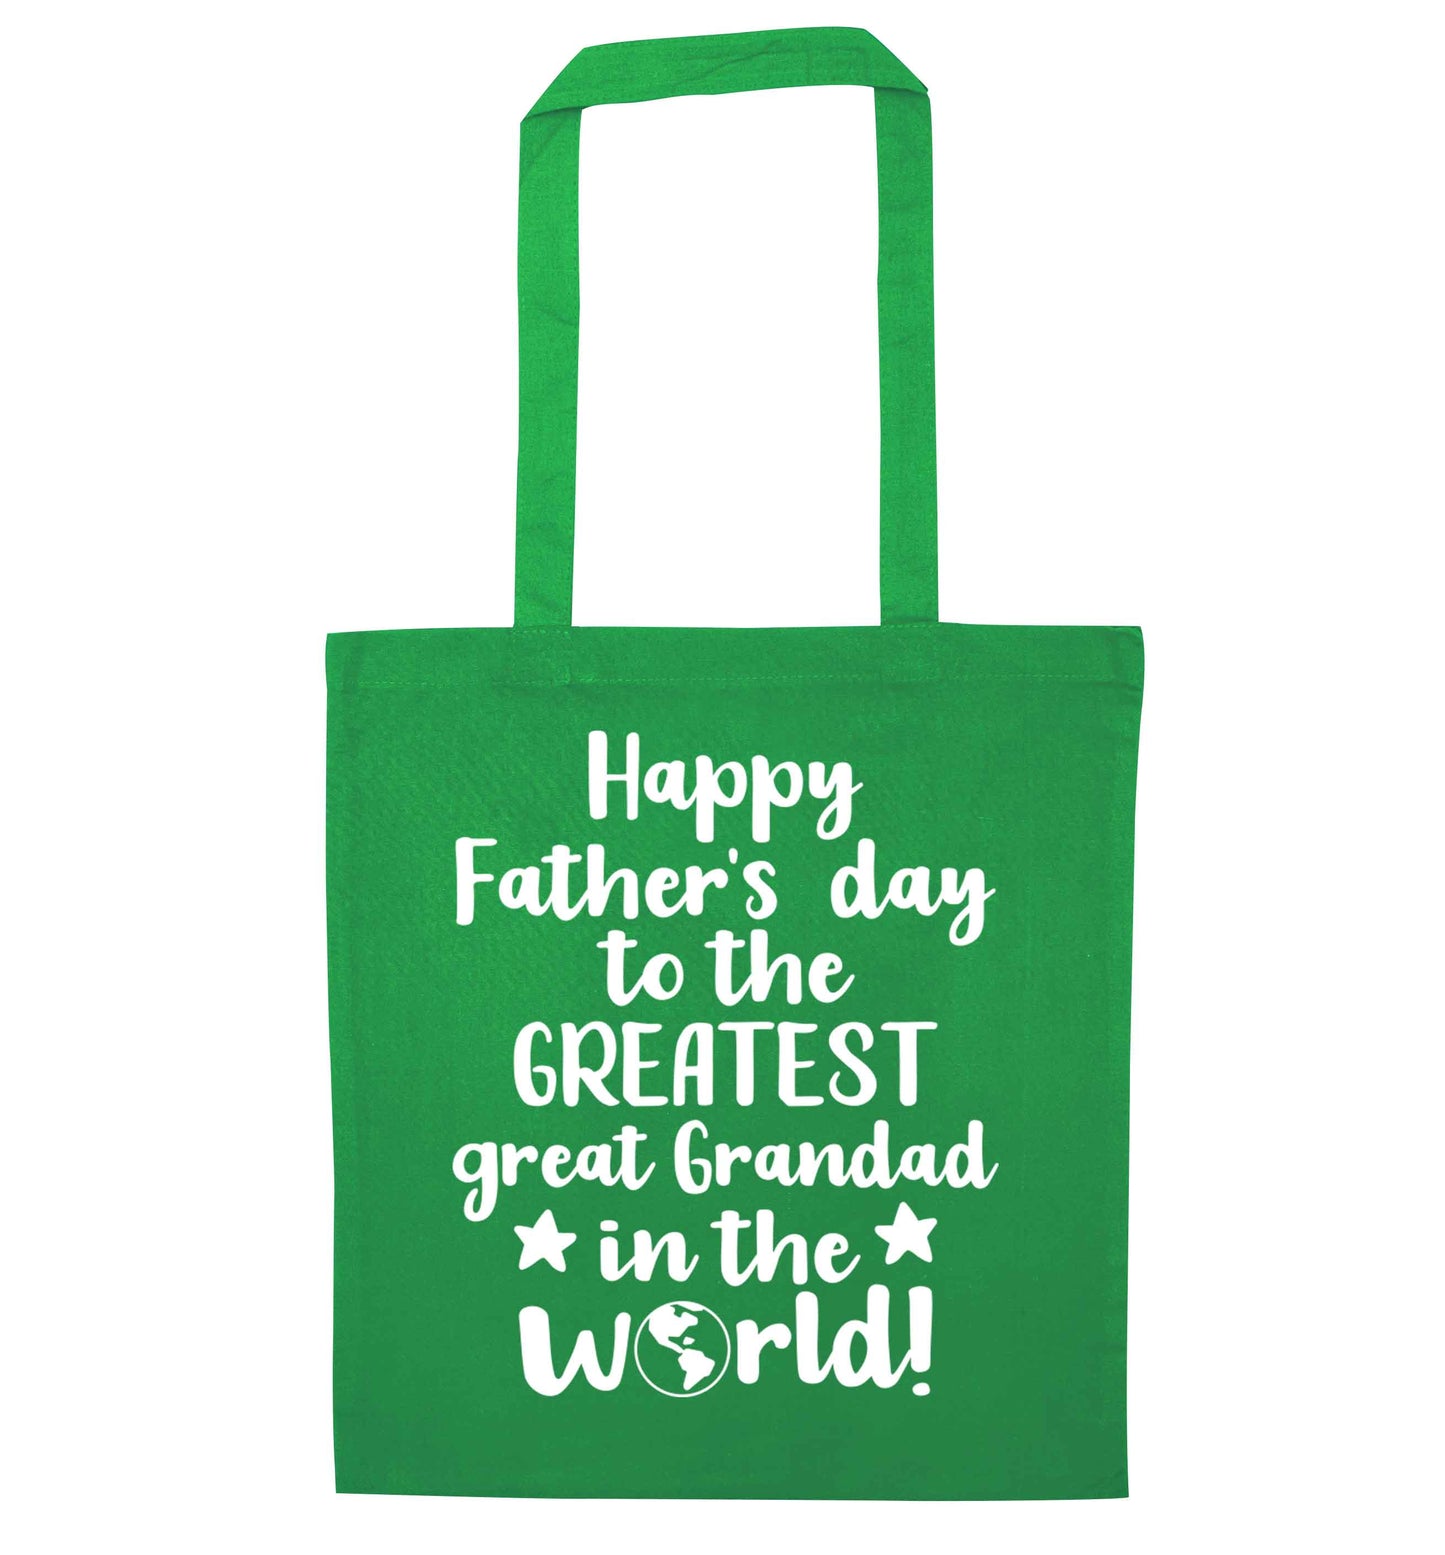 Happy Father's day to the greatest great grandad in the world green tote bag